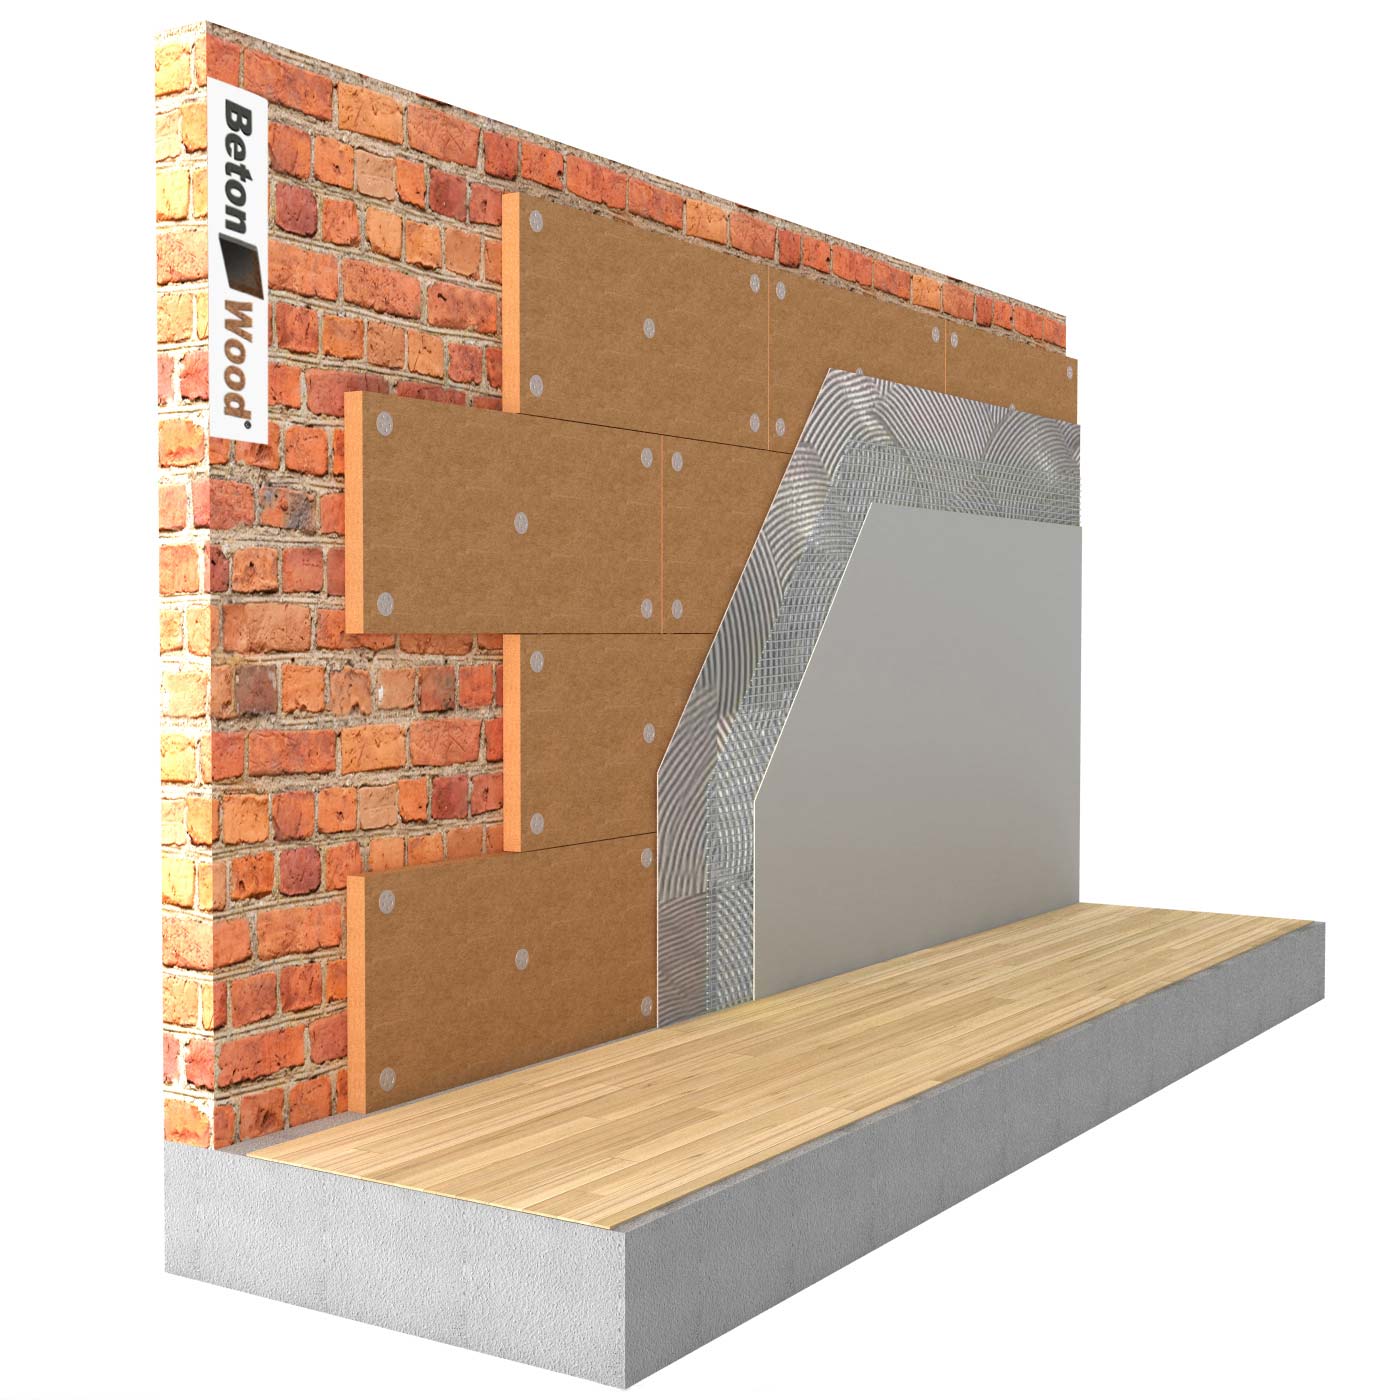 Internal thermal insulation system in Fiber wood